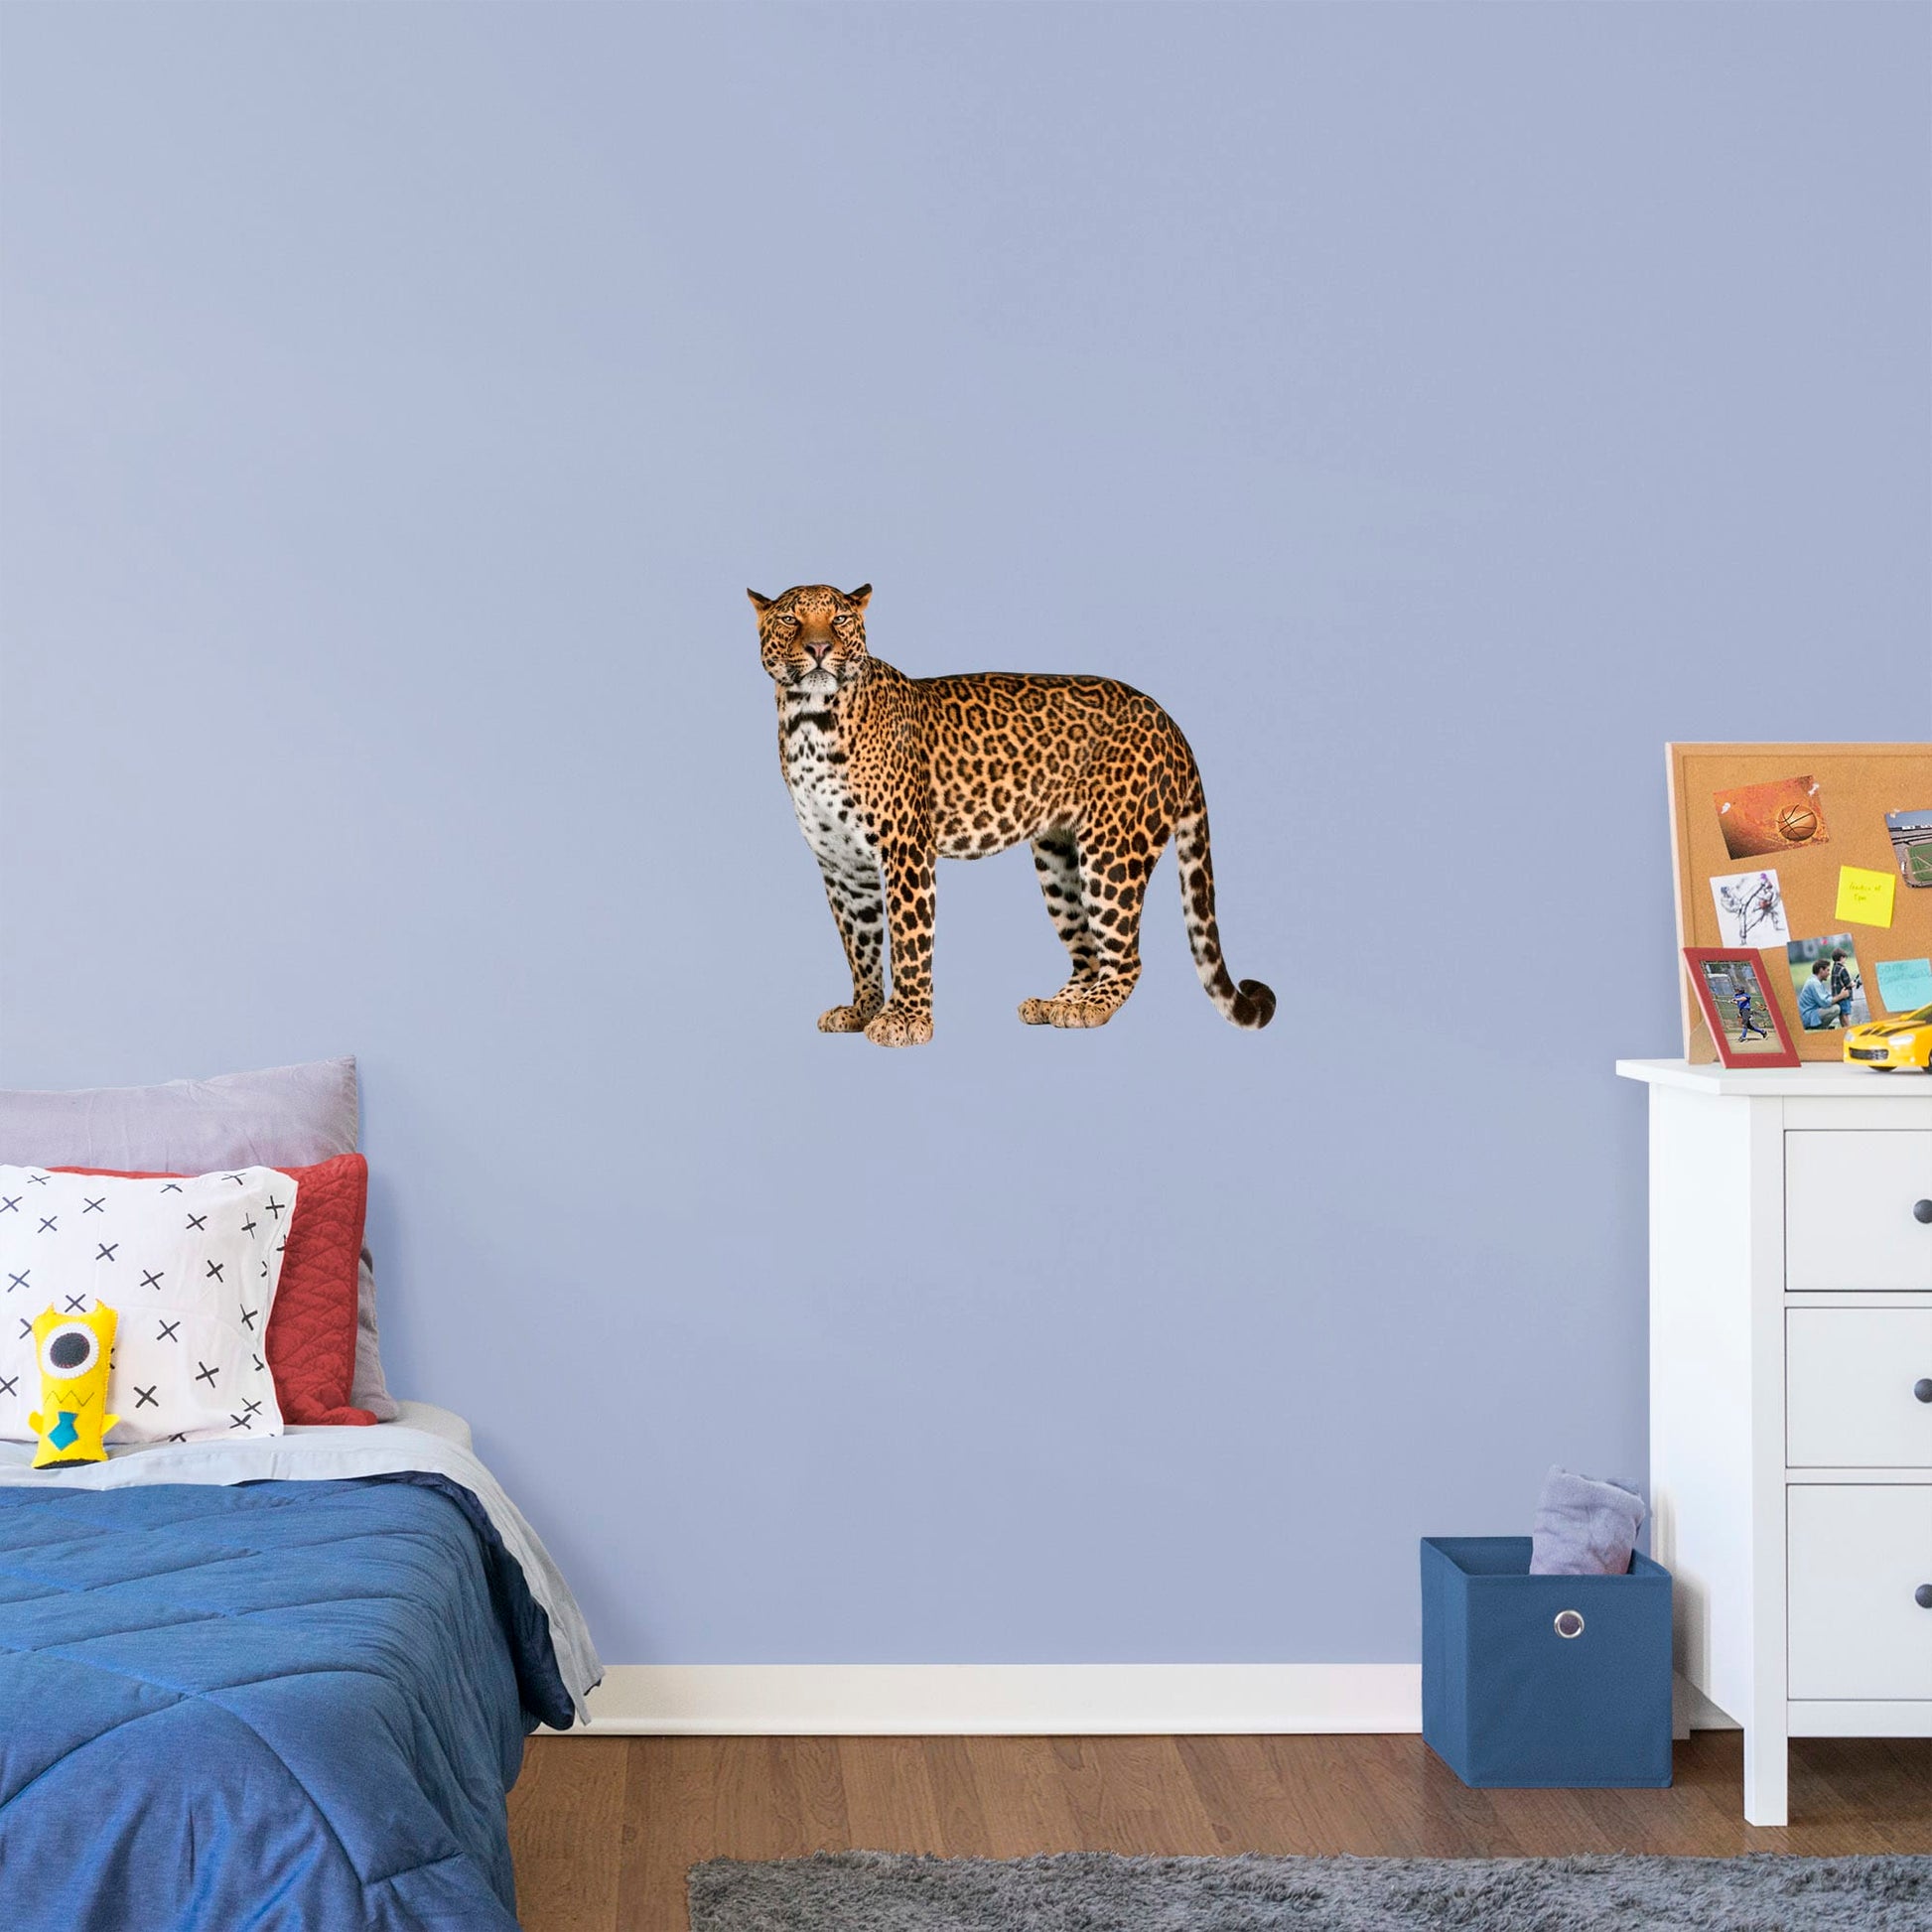 Life-Size Animal + 2 Decals (58"W x 51"H)